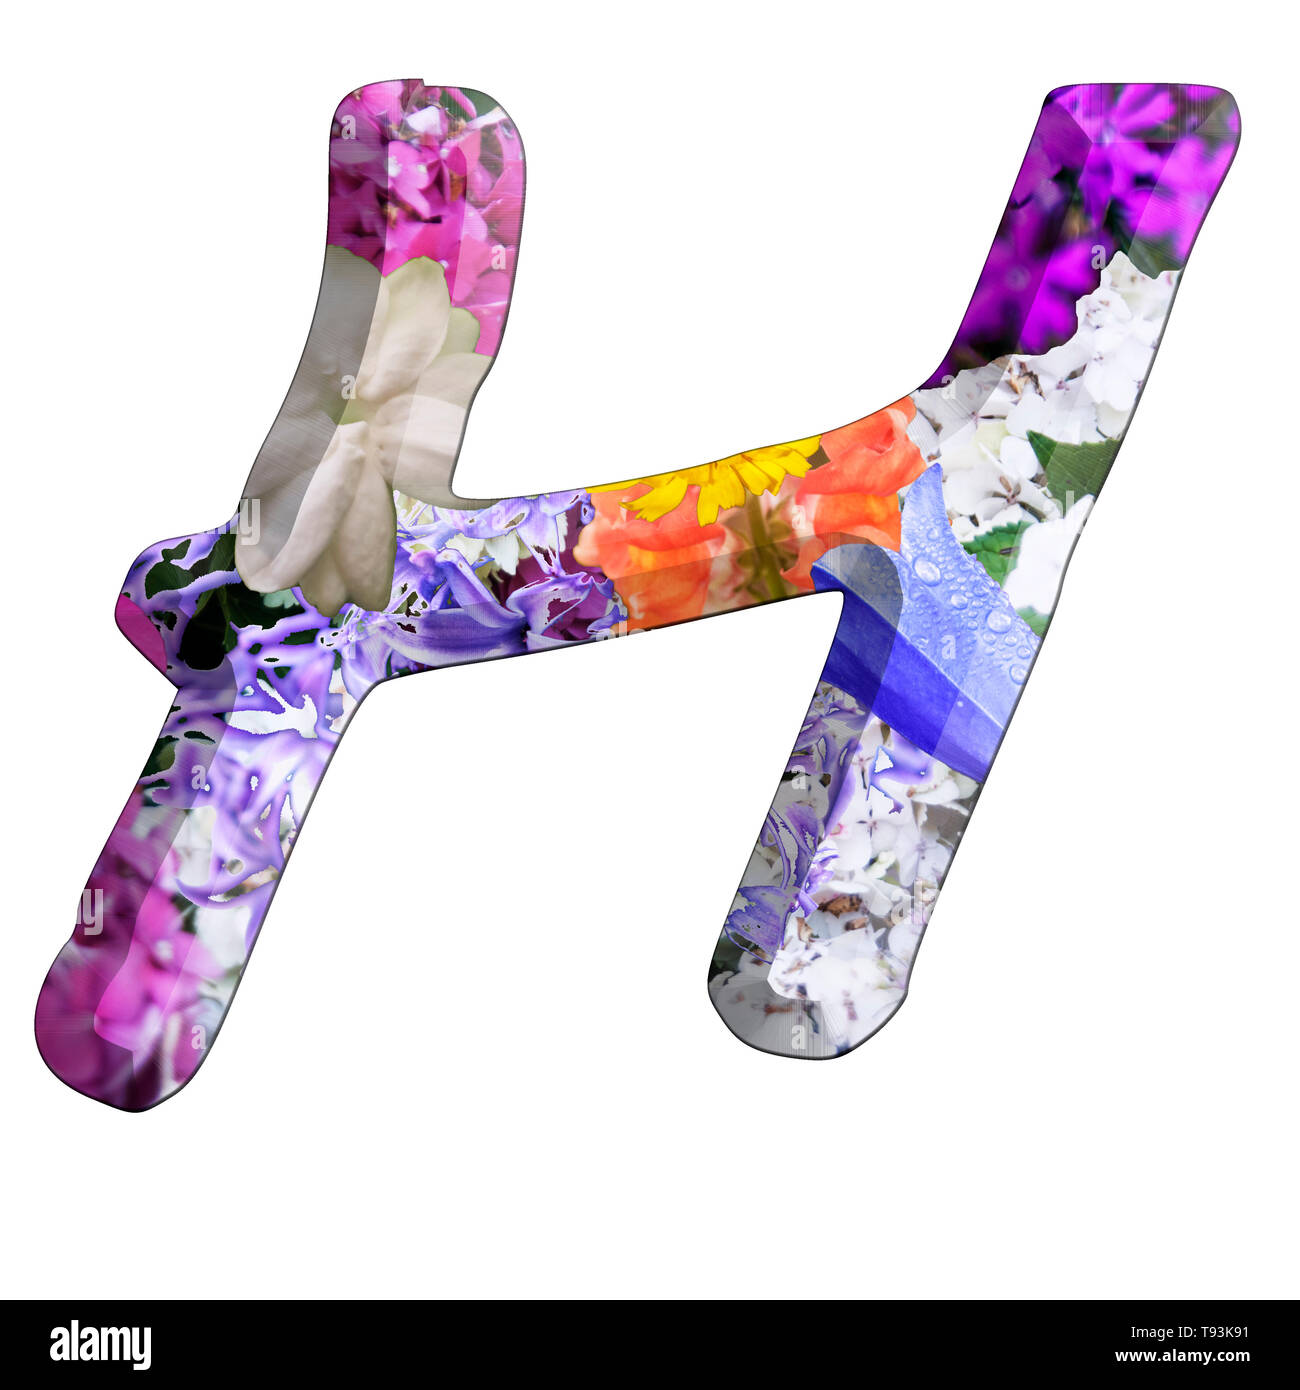 The Capitol Letter H Part of a set of letters, Numbers and symbols of 3D Alphabet made with colourful floral images on white background Stock Photo